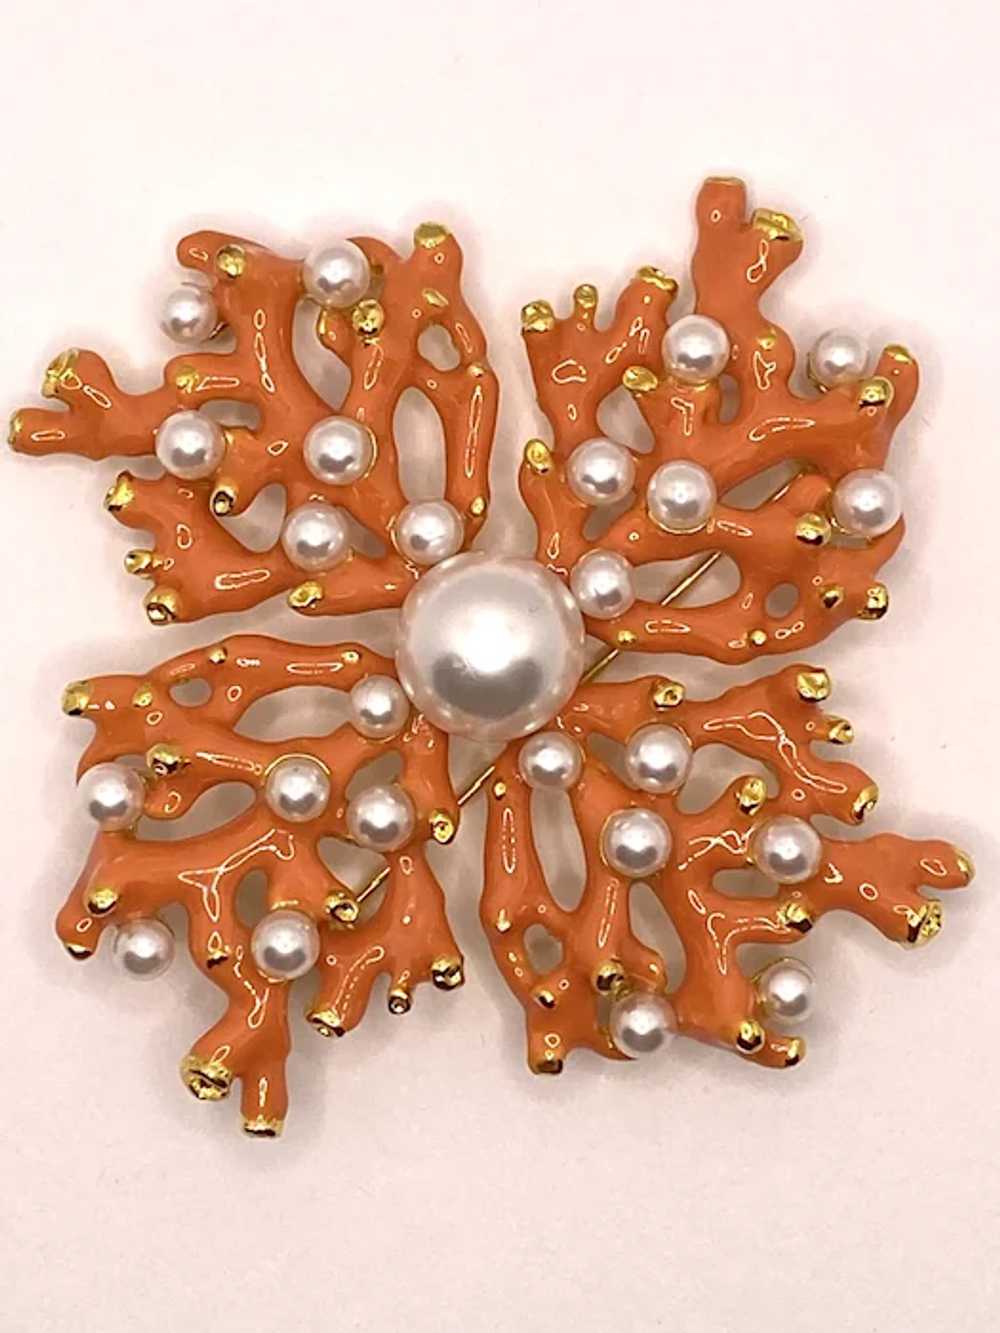 Gorgeous KJL Coral Faux Pearl Brooch - image 2